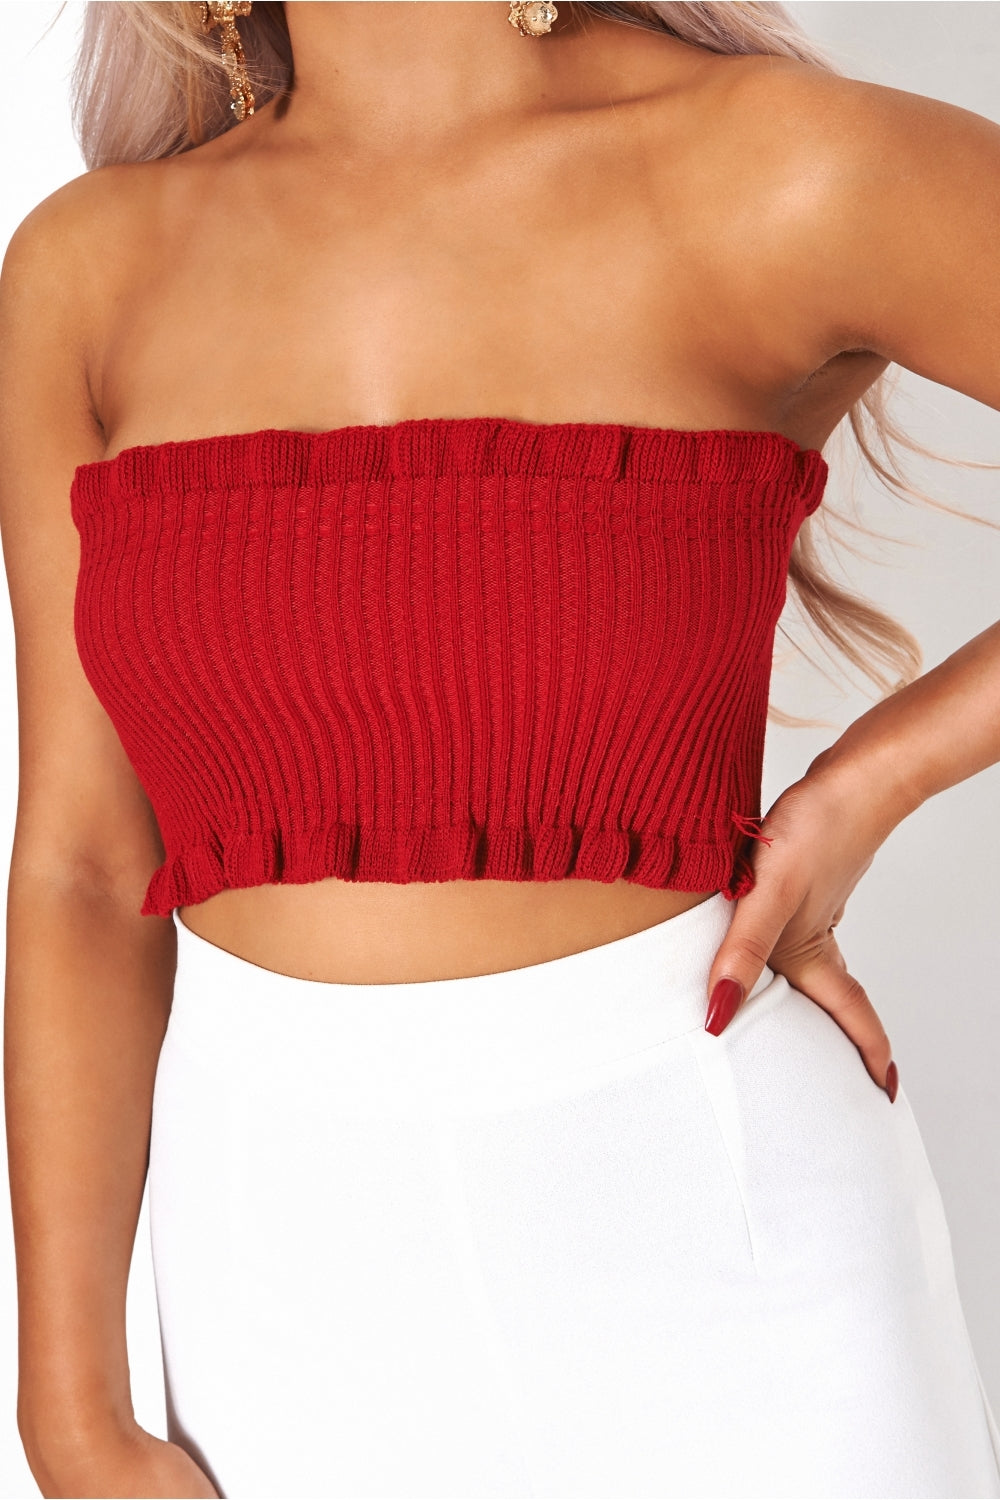 Red Strapless Bandeau Top